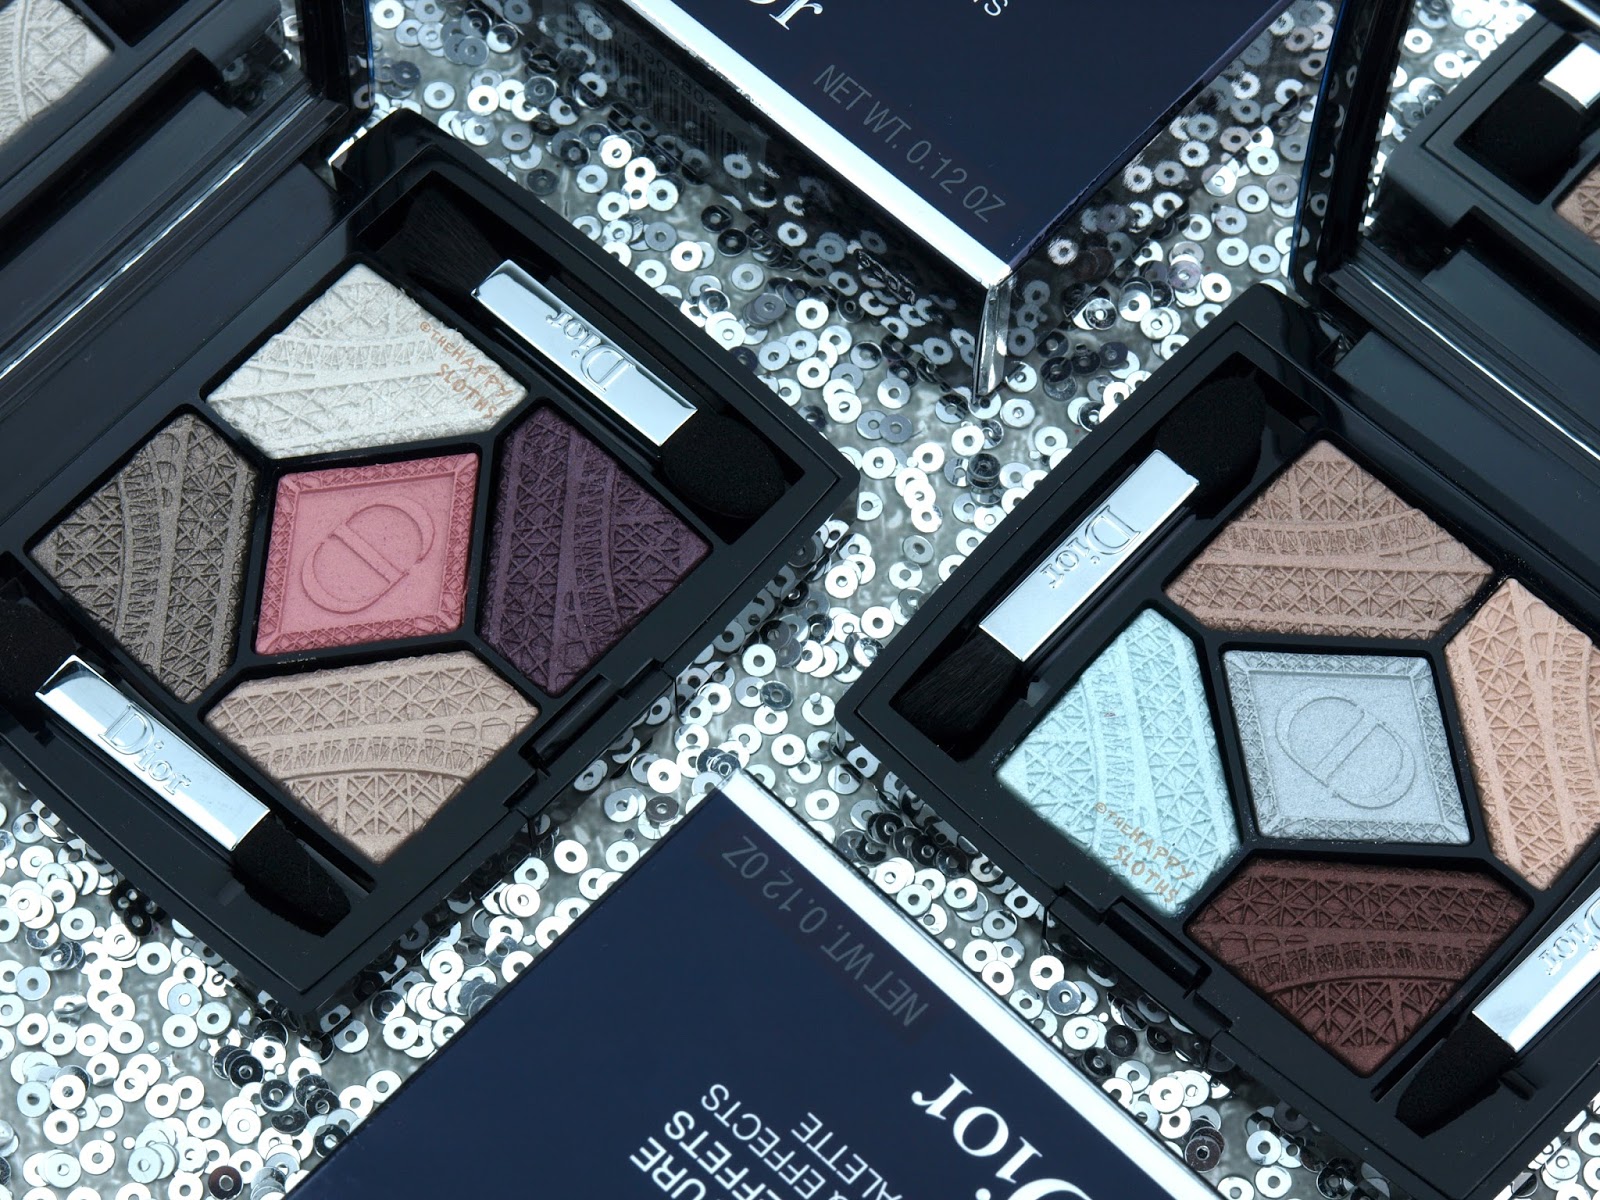 Dior Fall 2014 5 Couleurs Collection Review – The Pink Millennial